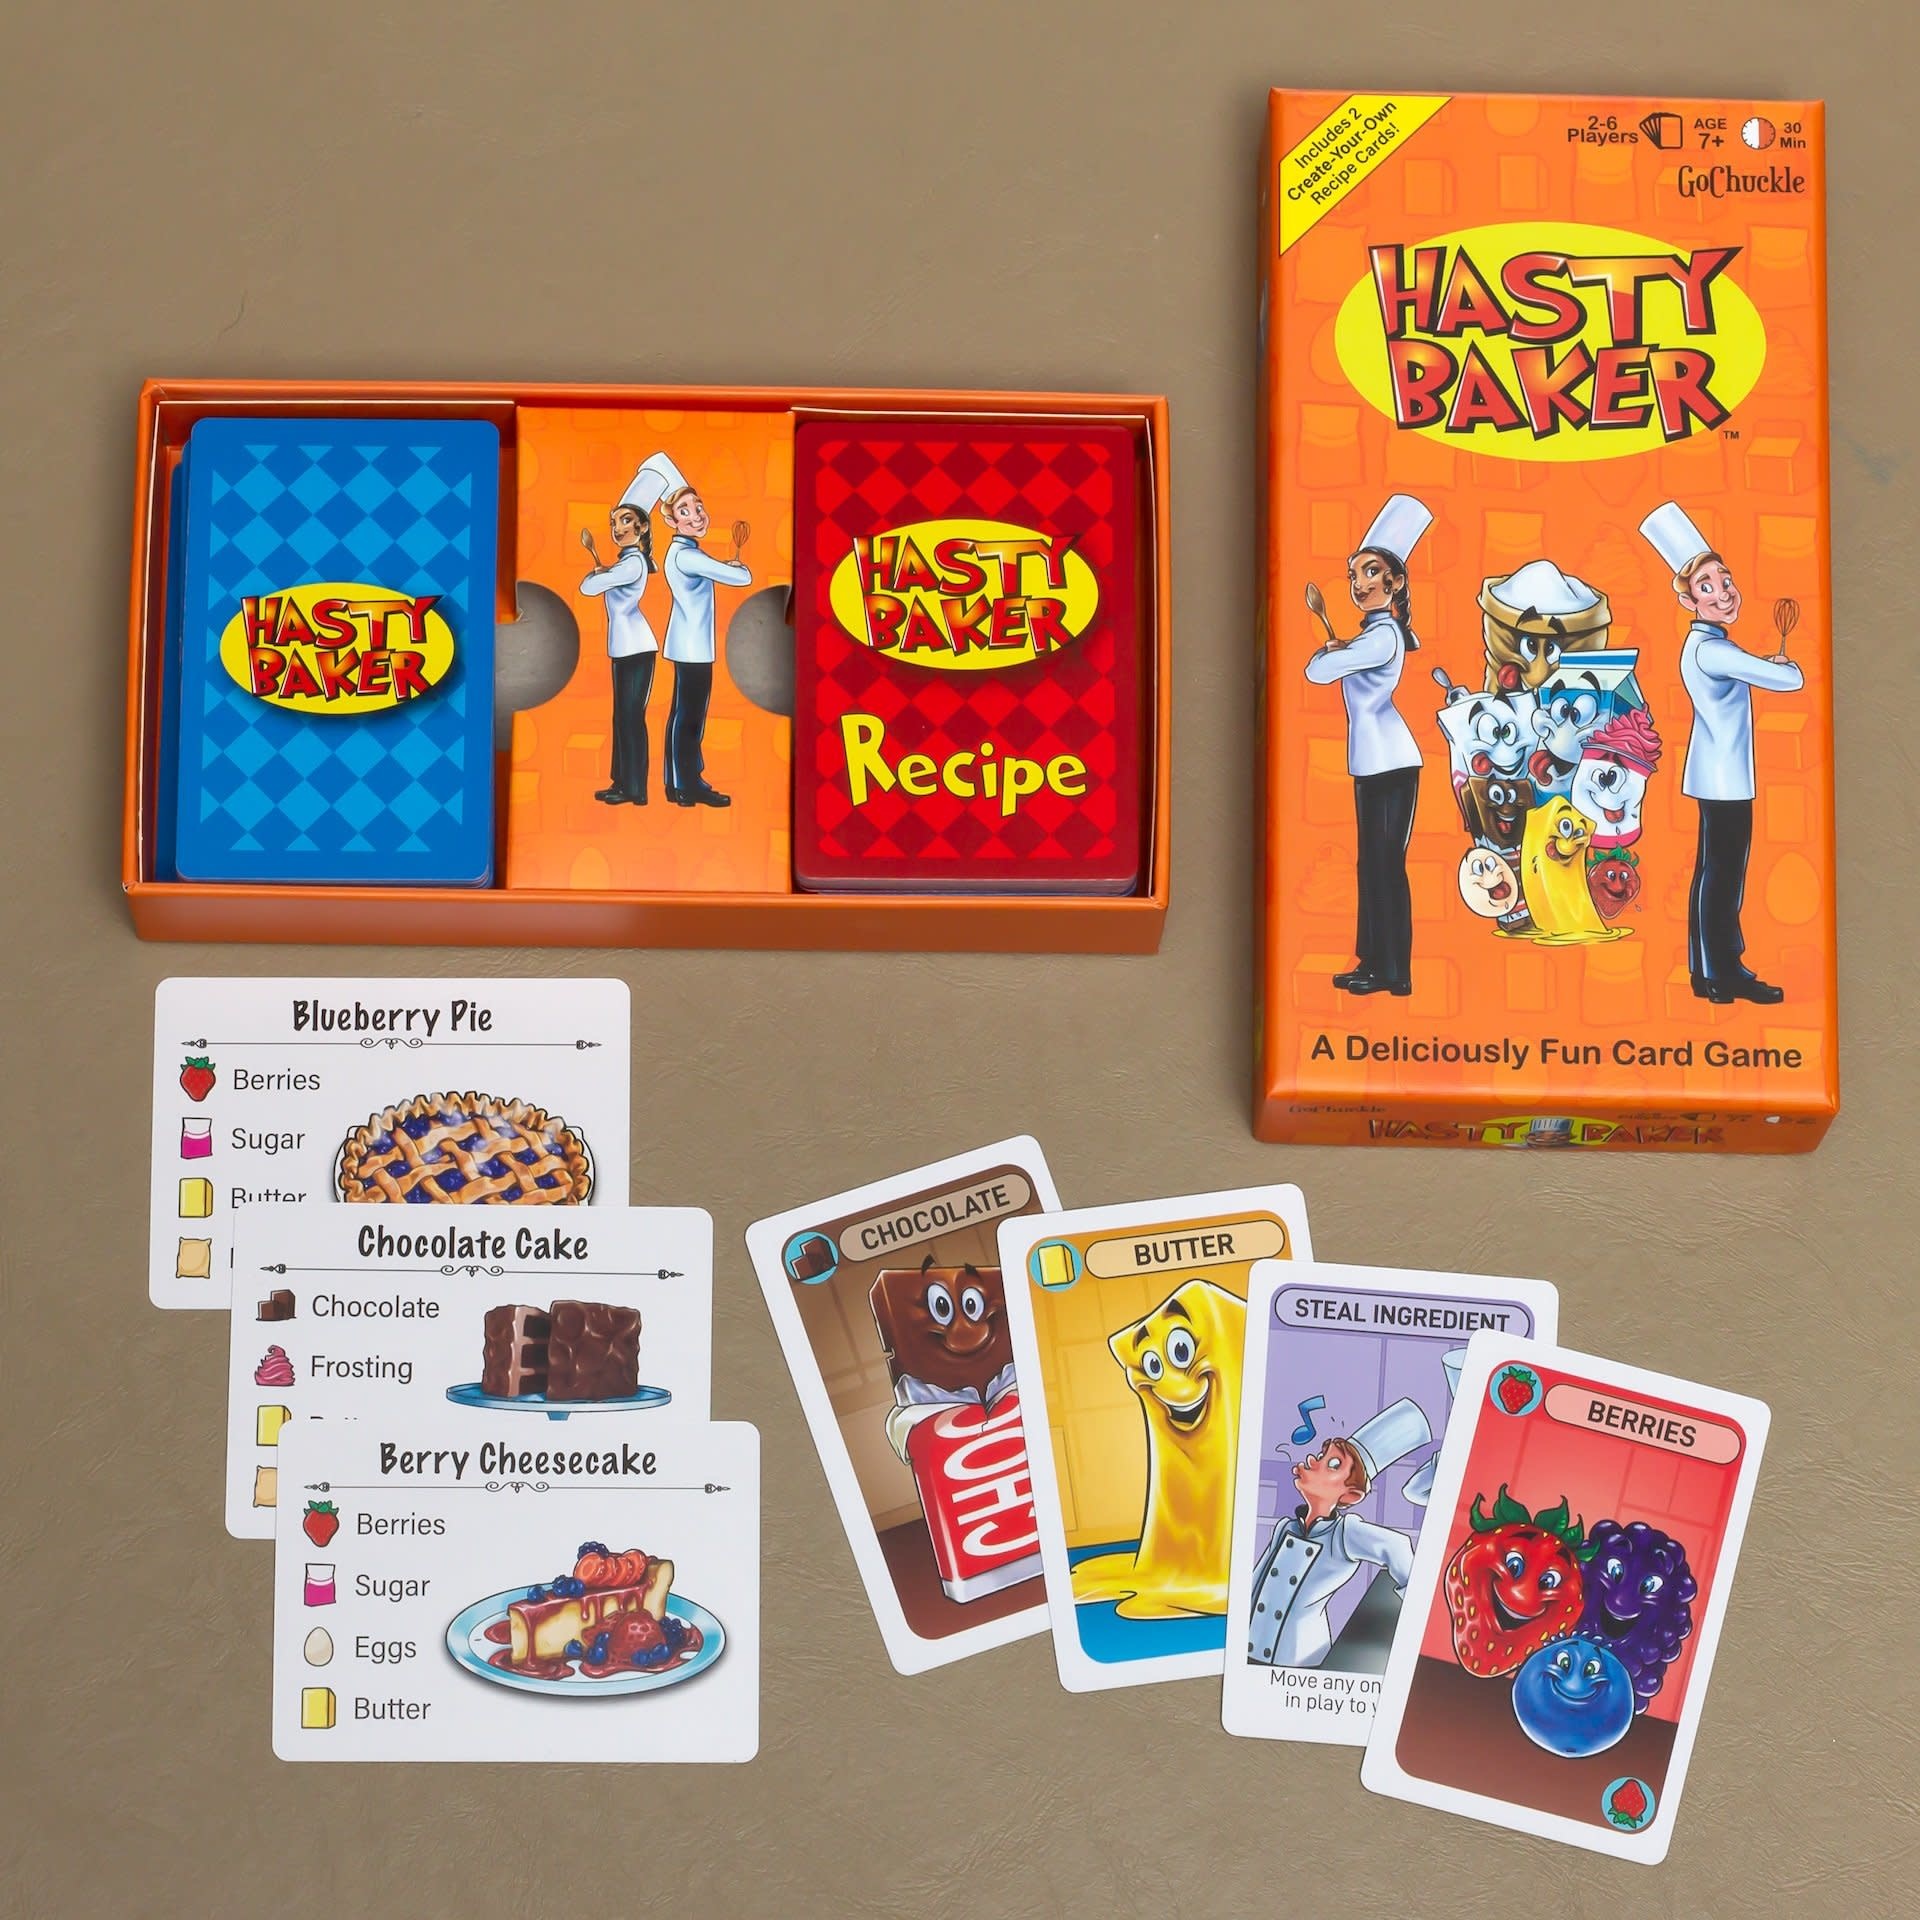  Hasty Baker Family Card Game 2-6 Players, Ages 7+, Creative  Child Game 2023, 2022 Game of The Year, Autism Live Award Winner Family Fun  Card Game Night for Kids and Adults 